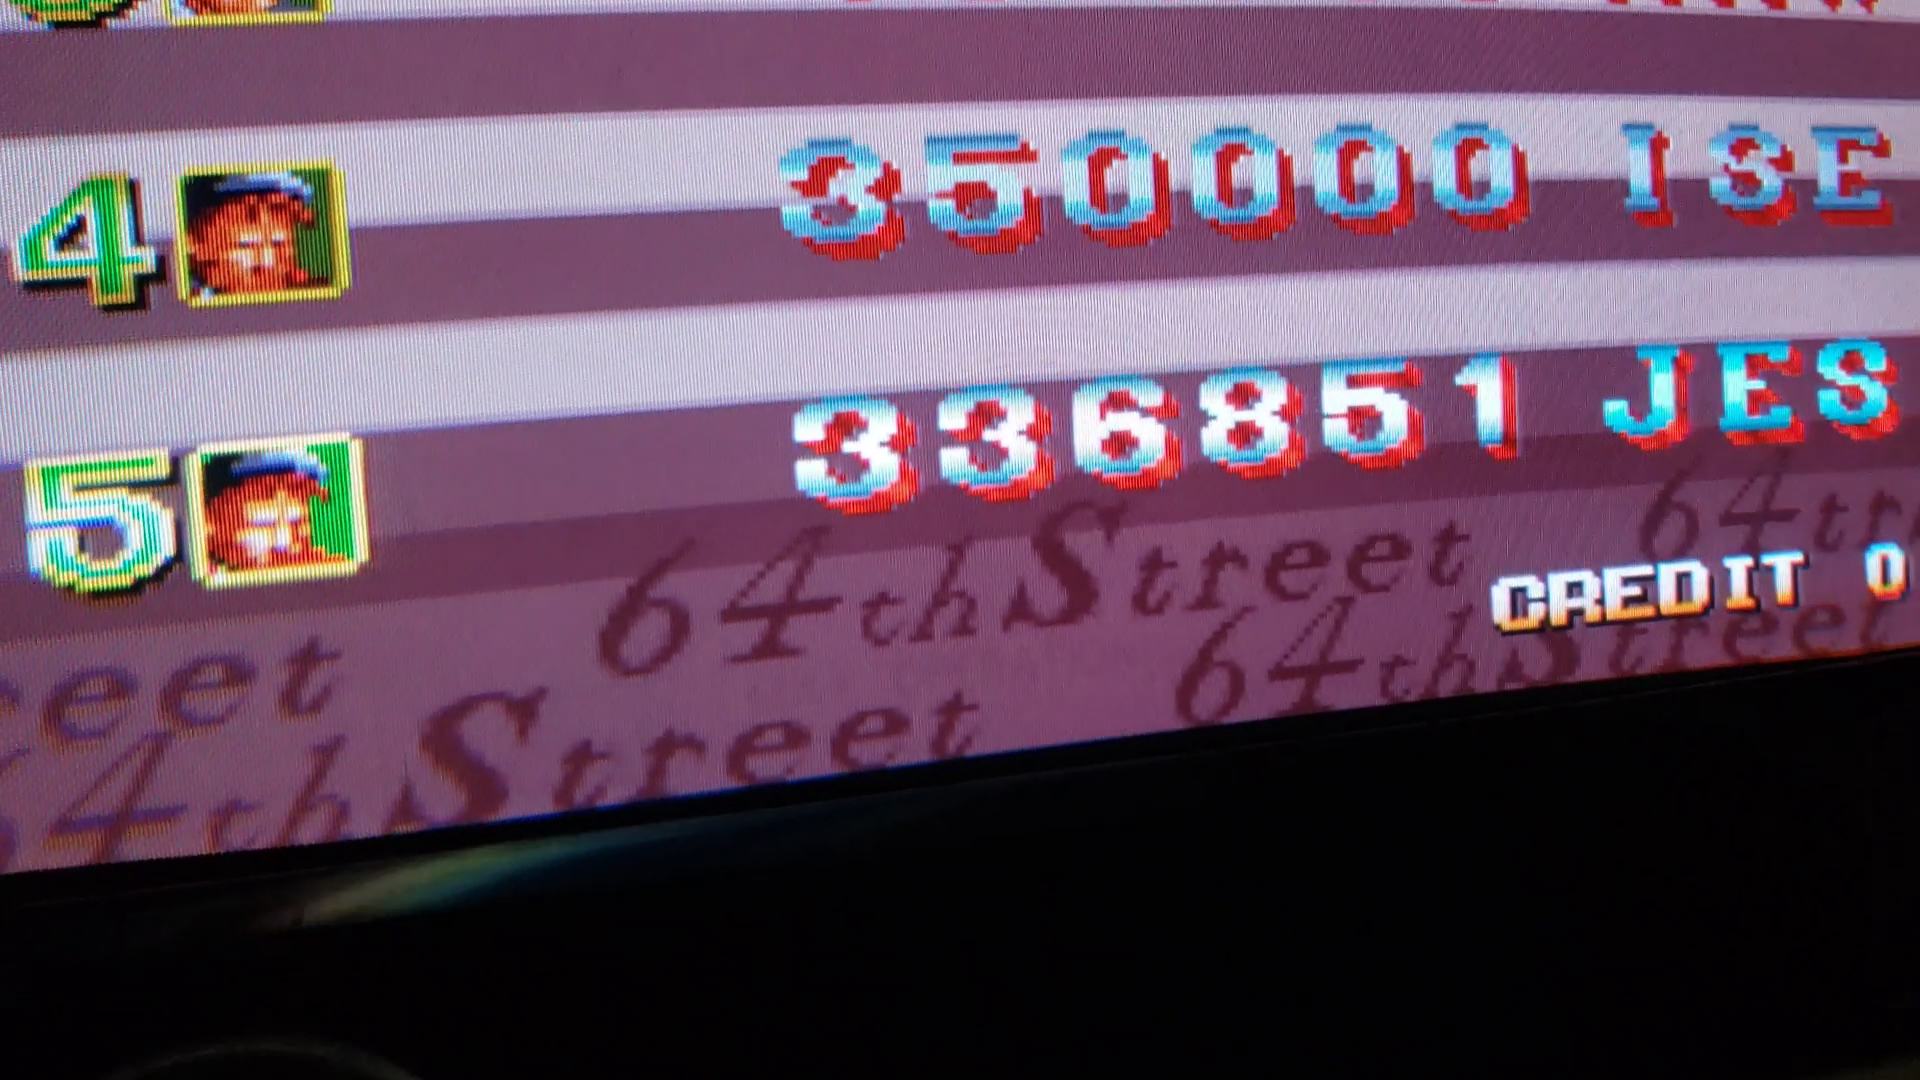 JES: 64th Street: A Detective Story (Arcade Emulated / M.A.M.E.) 336,851 points on 2020-10-03 02:11:22